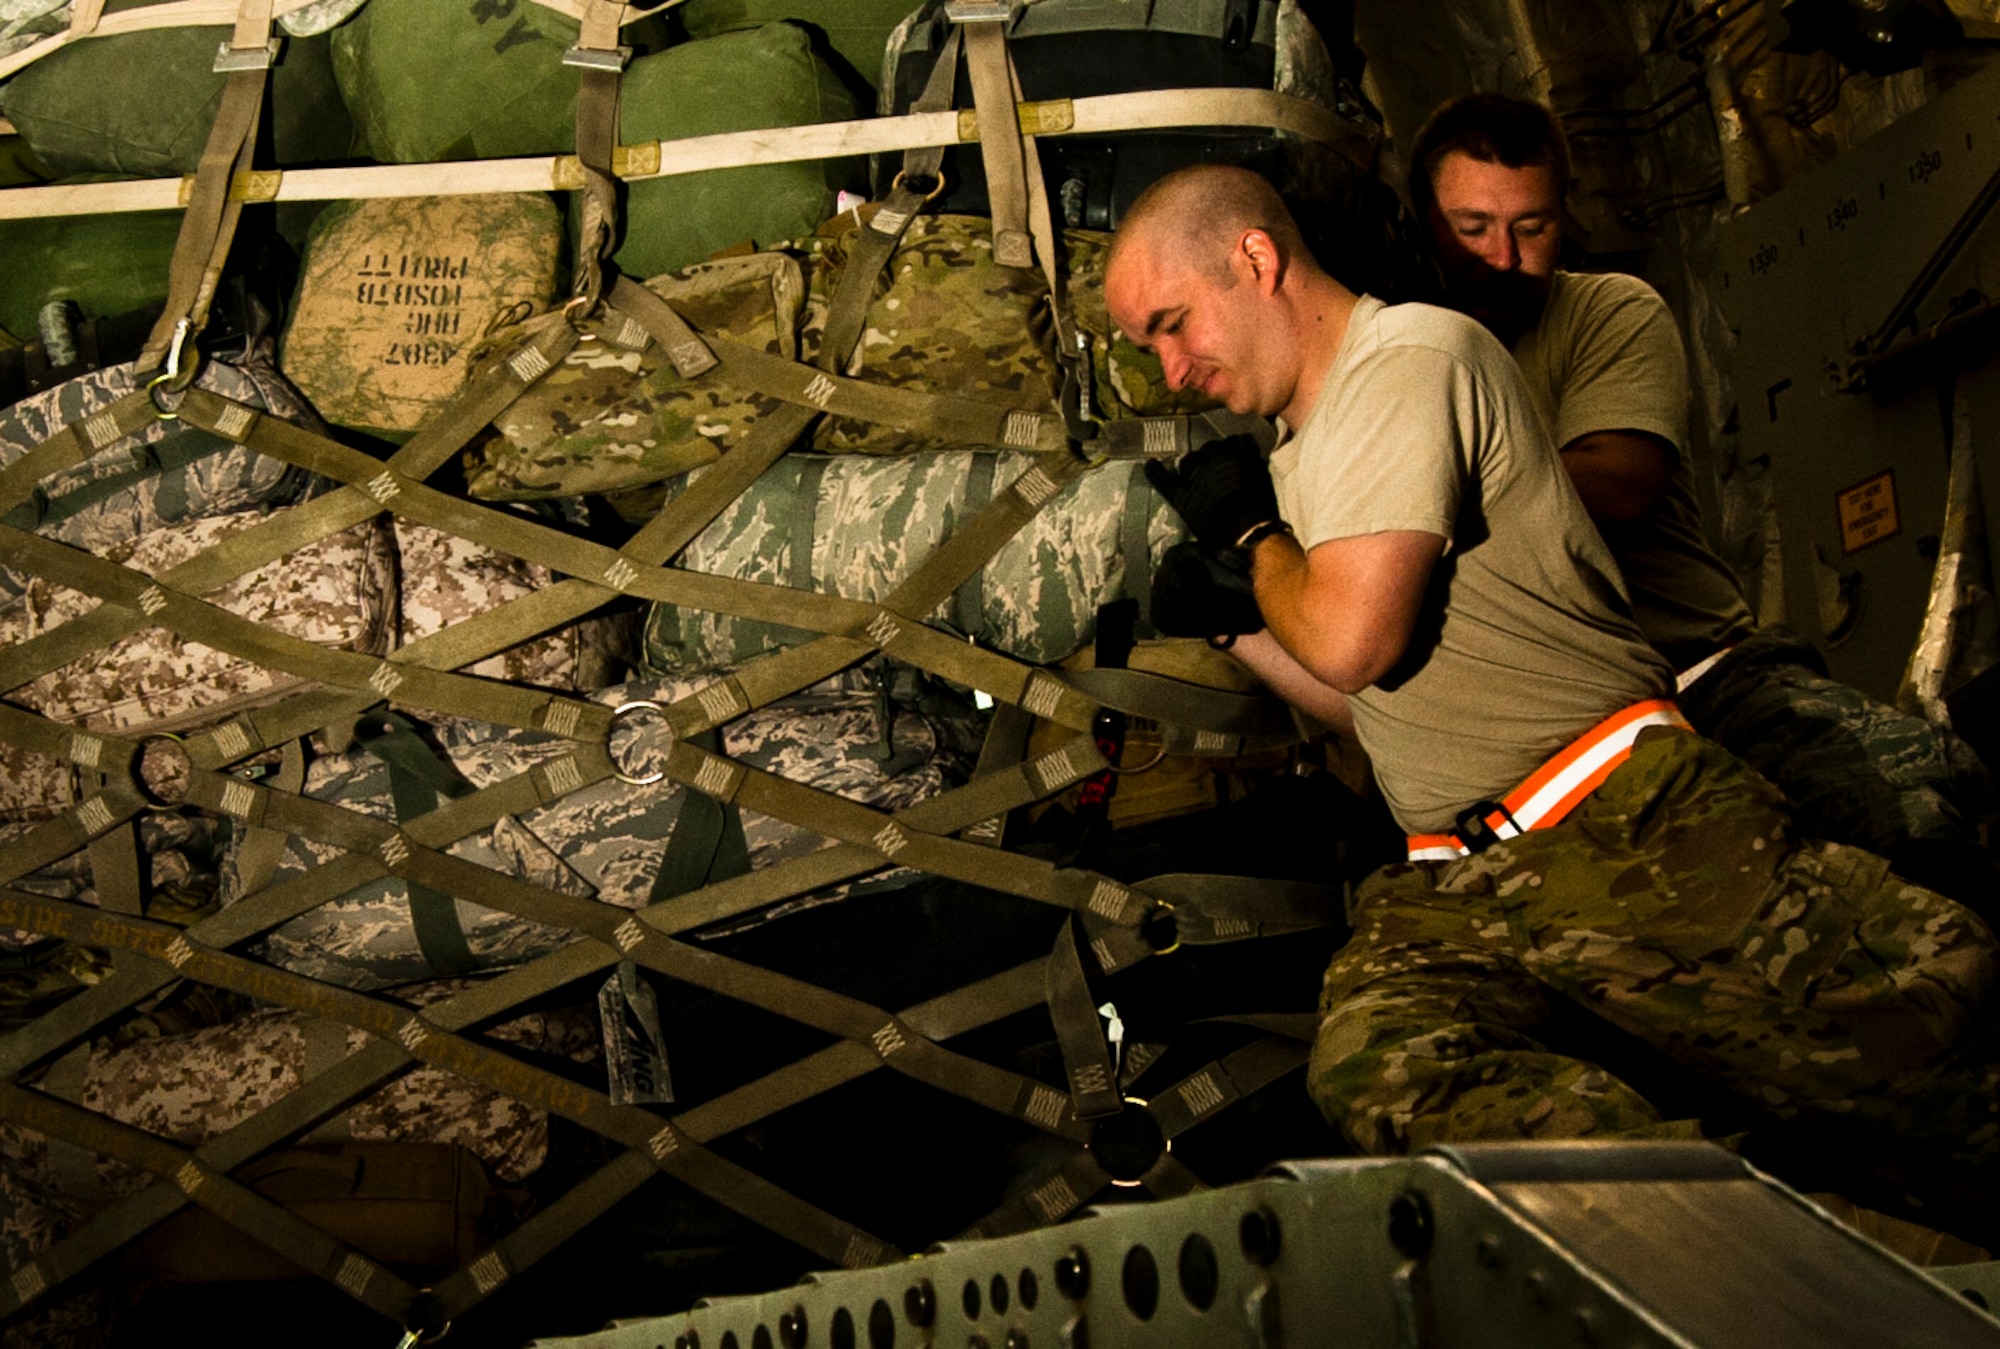 Senior Airman Robert Taylor (front), 455th Expeditionary Aerial Port Squadron Passenger Services representative and Tech. Sgt Nicholas Hotham (back), 455th Expeditionary Passenger Services Line supervisor, maneuver a cargo pallet aboard U.S. Air C-17 Globemaster III at Bagram Airfield, Afghanistan, June 7, 2012. Airmen with 455 EAPS serve up to 2,500 passengers daily. (U.S. Air Force photo/Capt. Raymond Geoffroy)